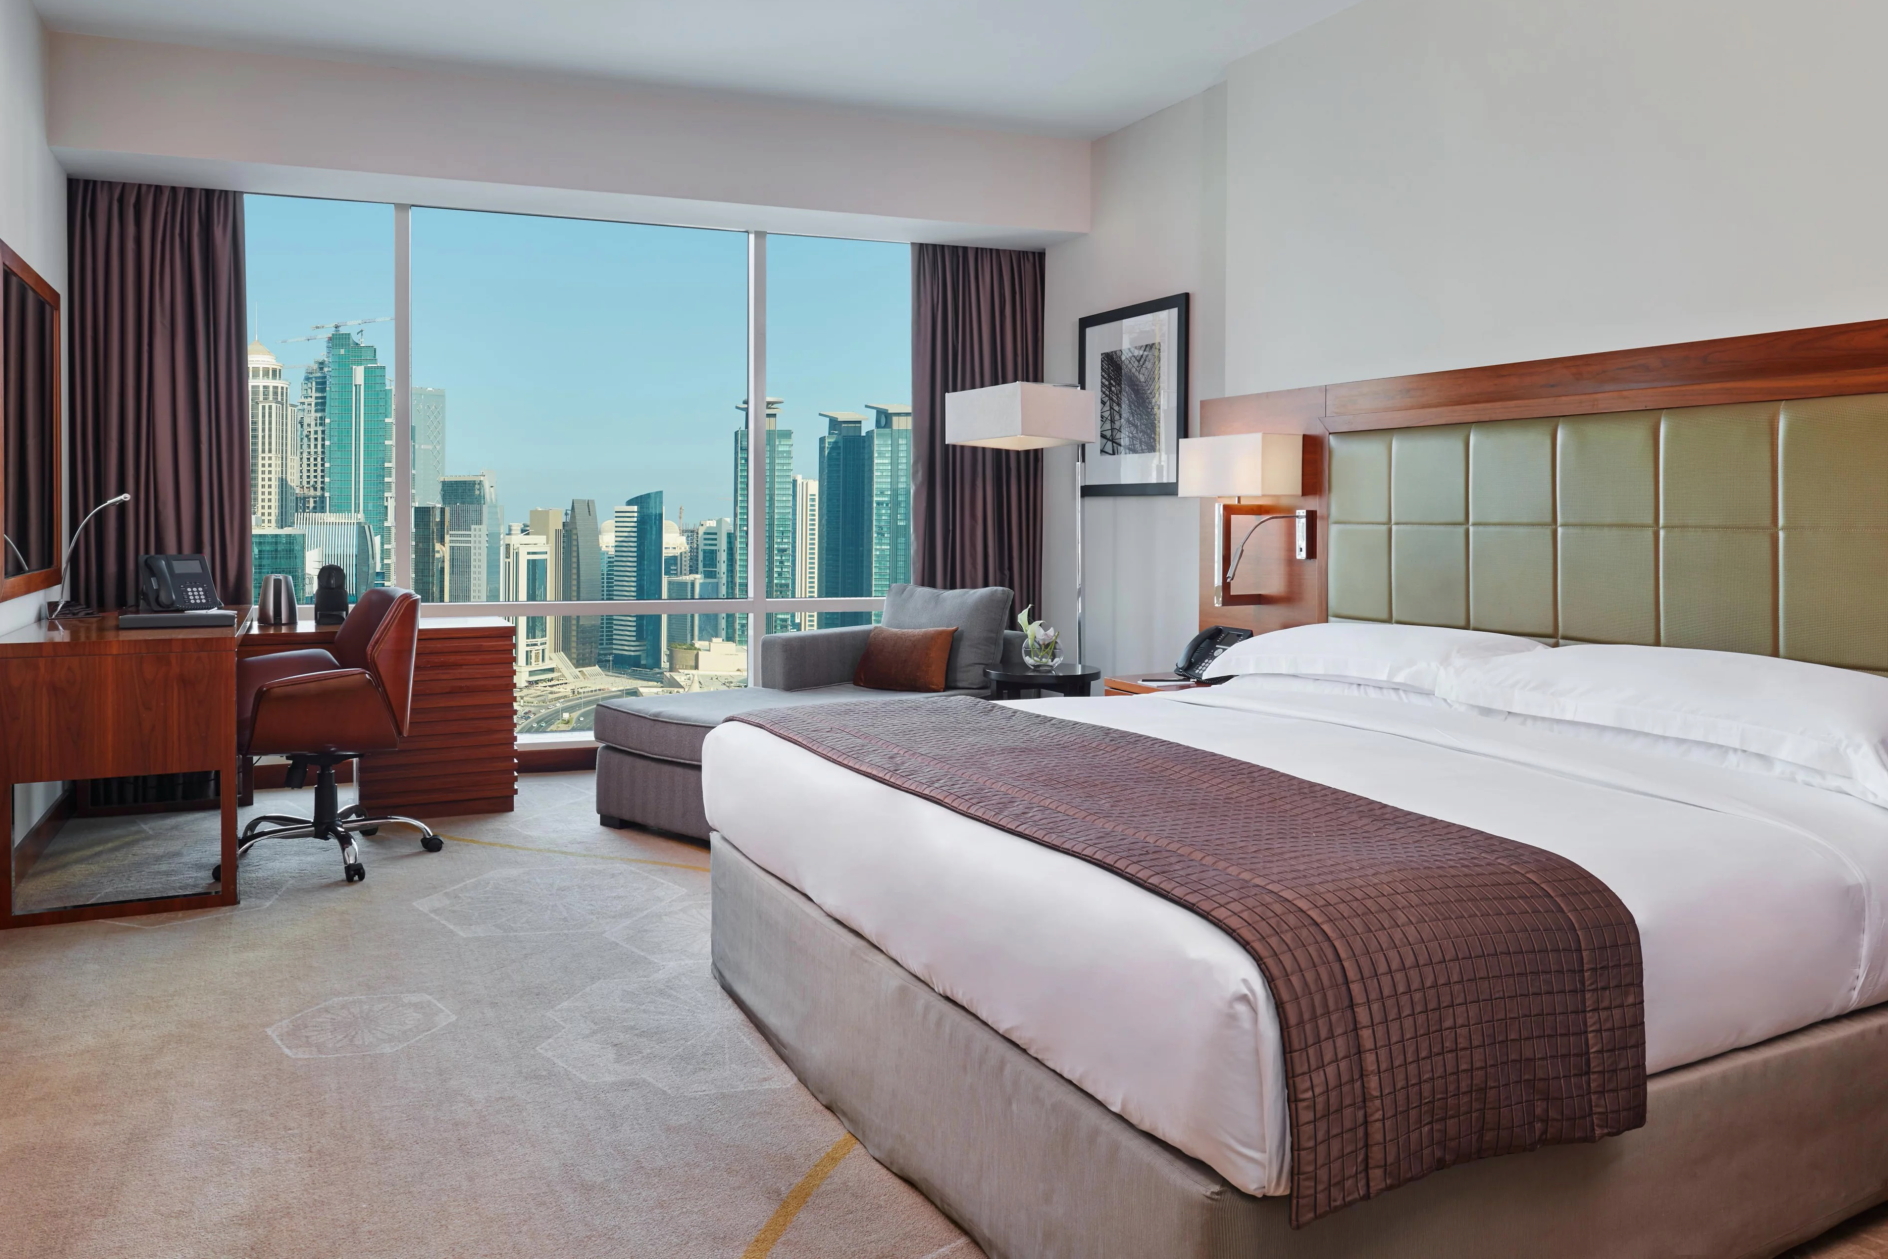 Premier Room at InterContinental Doha The City in Qatar. Click to enlarge.